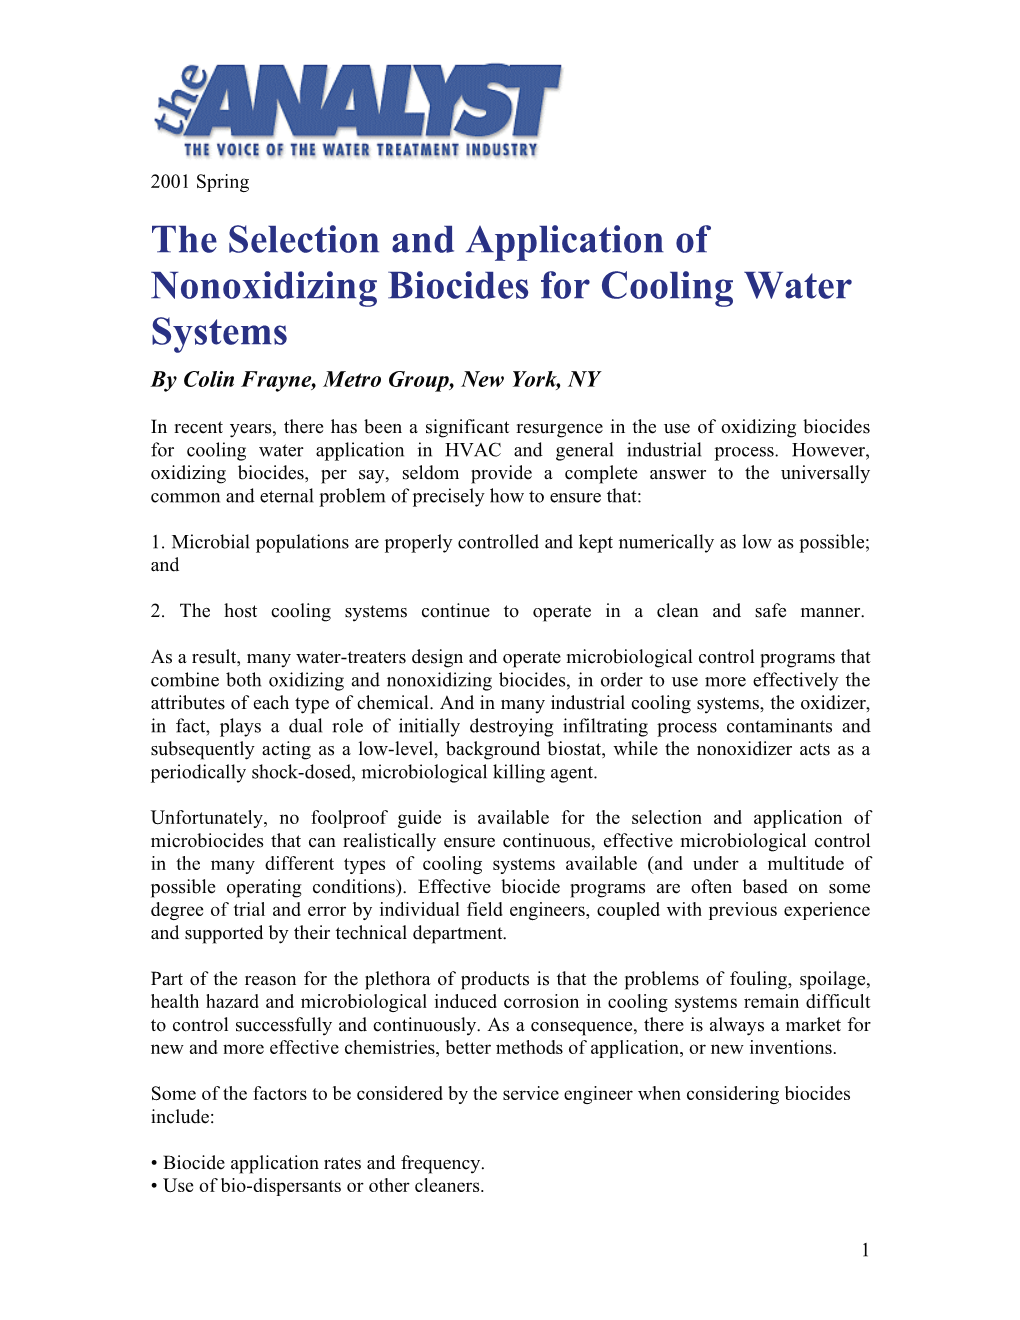 The Selection and Application of Nonoxidizing Biocides for Cooling Water Systems